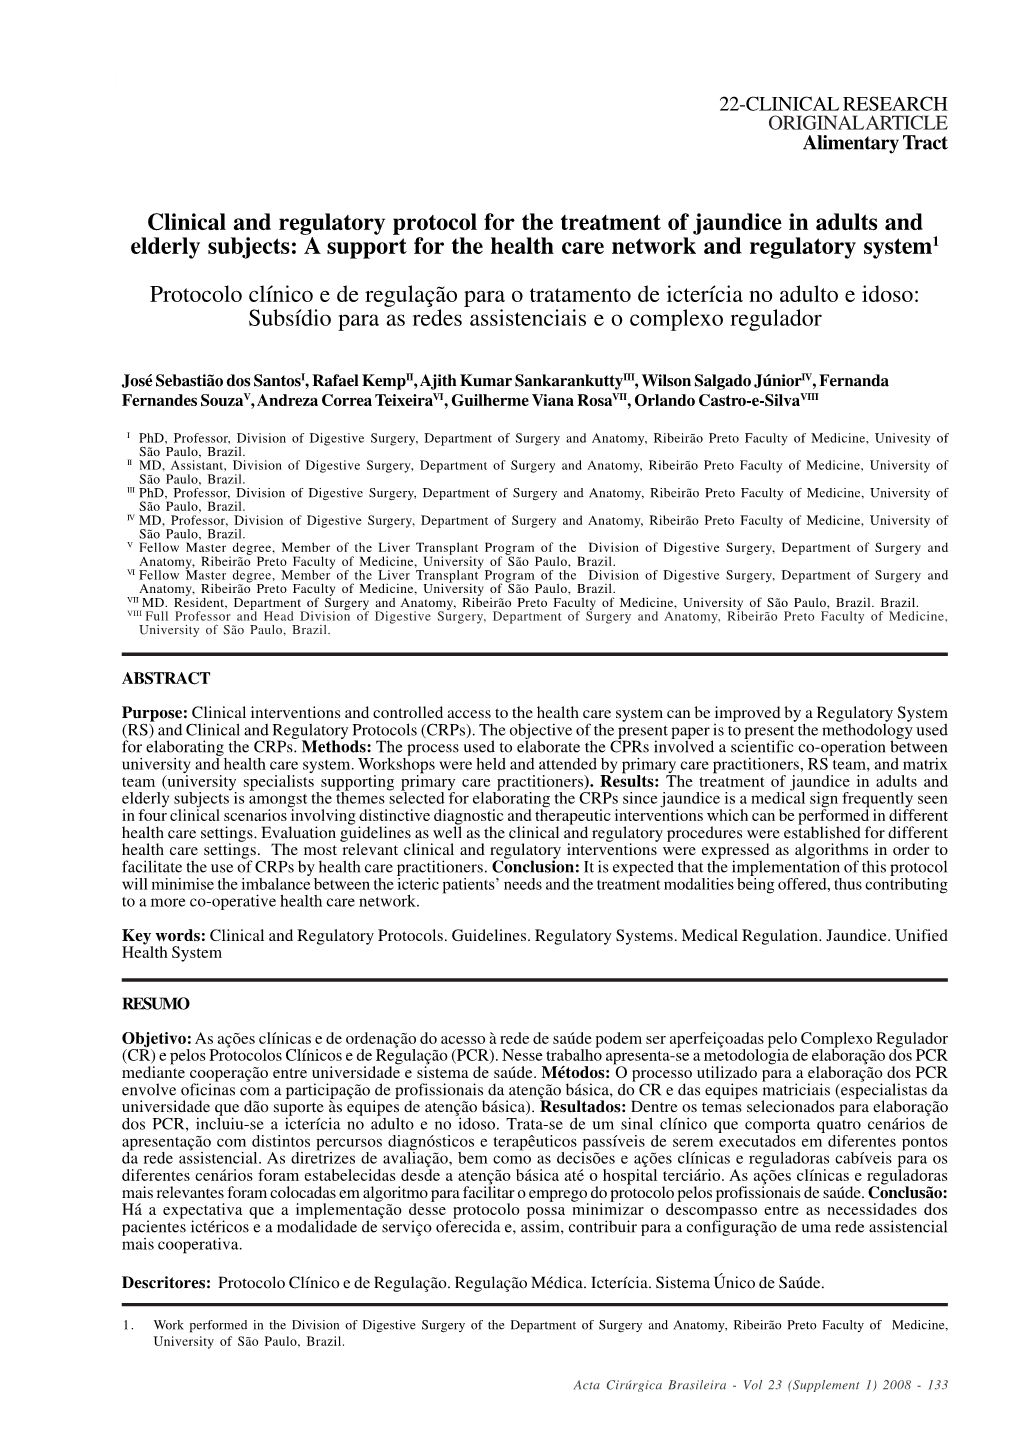 Clinical and Regulatory Protocol for the Treatment of Jaundice in Adults and Elderly Subjects: a Support for the Health Care Network